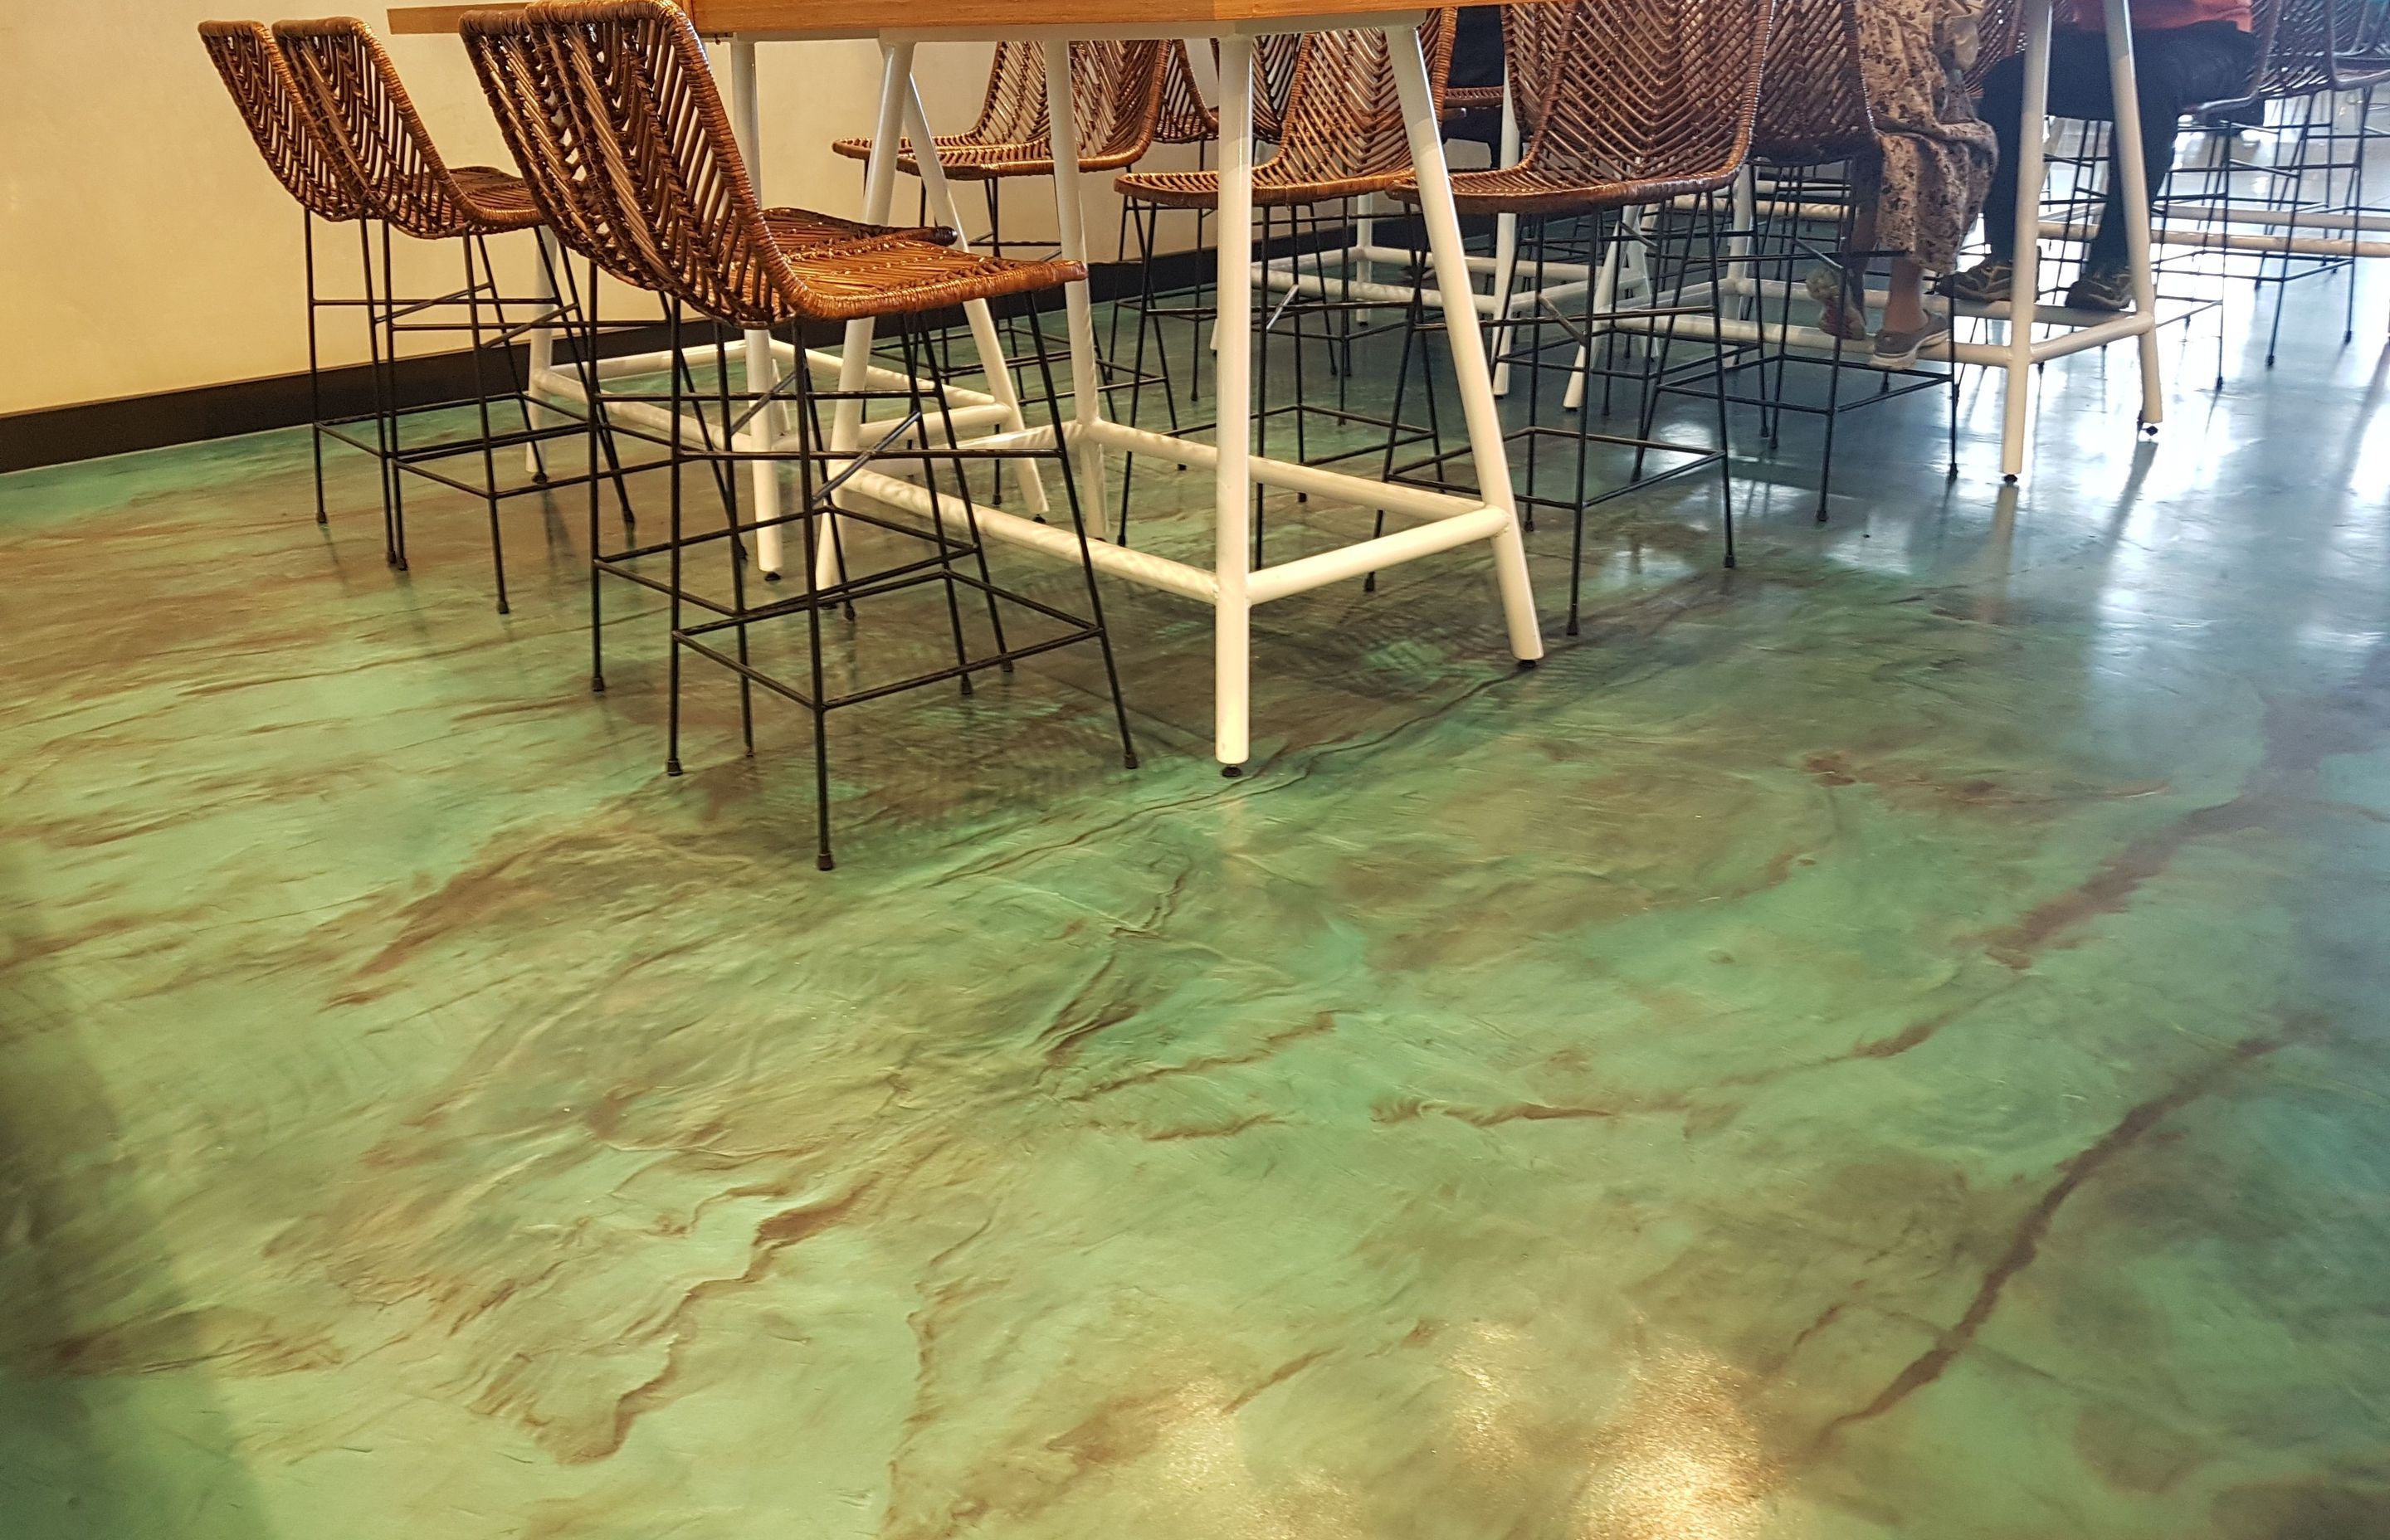 The Micro-colour finish was teamed with a metallic epoxy floor coating to create a truly unique interior.